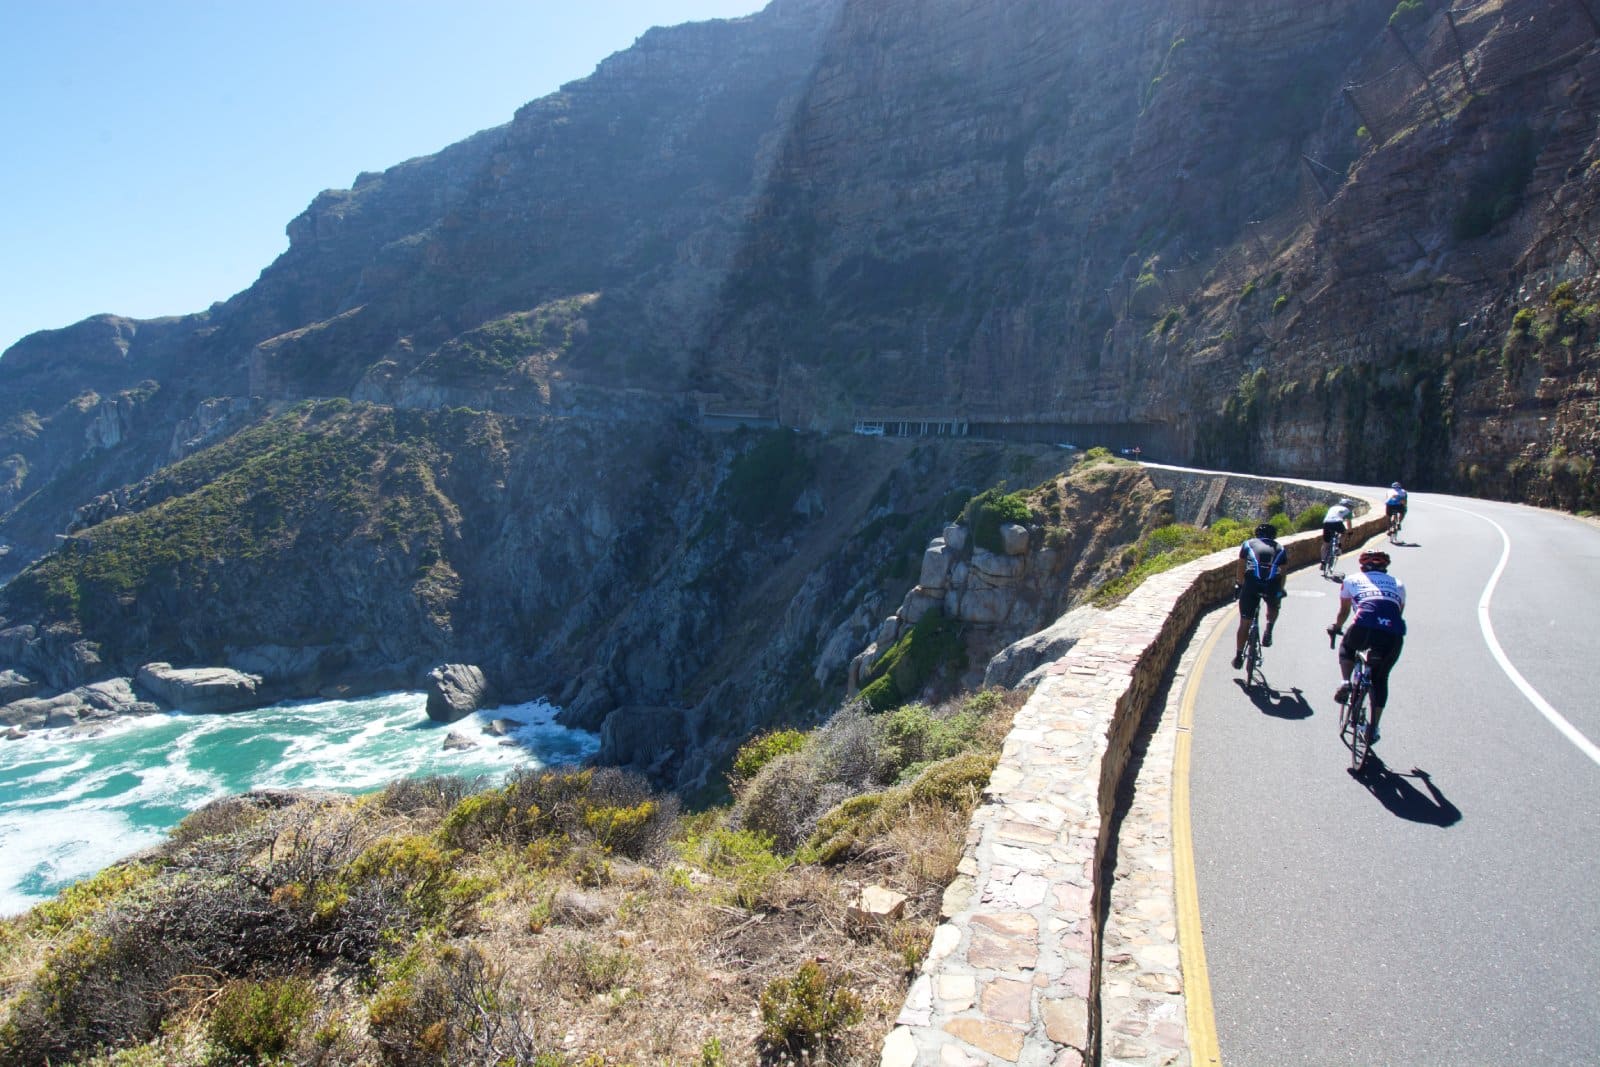 <p><span>The Cape Argus route in South Africa is known for its famous cycling race and as a spectacular cycling destination. The route takes you around the picturesque Cape Peninsula, offering views of both the Atlantic and Indian Oceans, rugged mountains, and diverse flora and fauna.</span></p> <p><span>The ride includes challenging climbs and fast descents, making it a thrilling experience for seasoned cyclists. Along the way, you’ll pass through historic towns and have the chance to see wildlife, such as baboons and ostriches.</span></p> <p><b>Insider’s Tip: </b><span>If you’re up for a challenge, time your visit to participate in the annual Cape Town Cycle Tour, the world’s largest timed cycling event.</span></p>